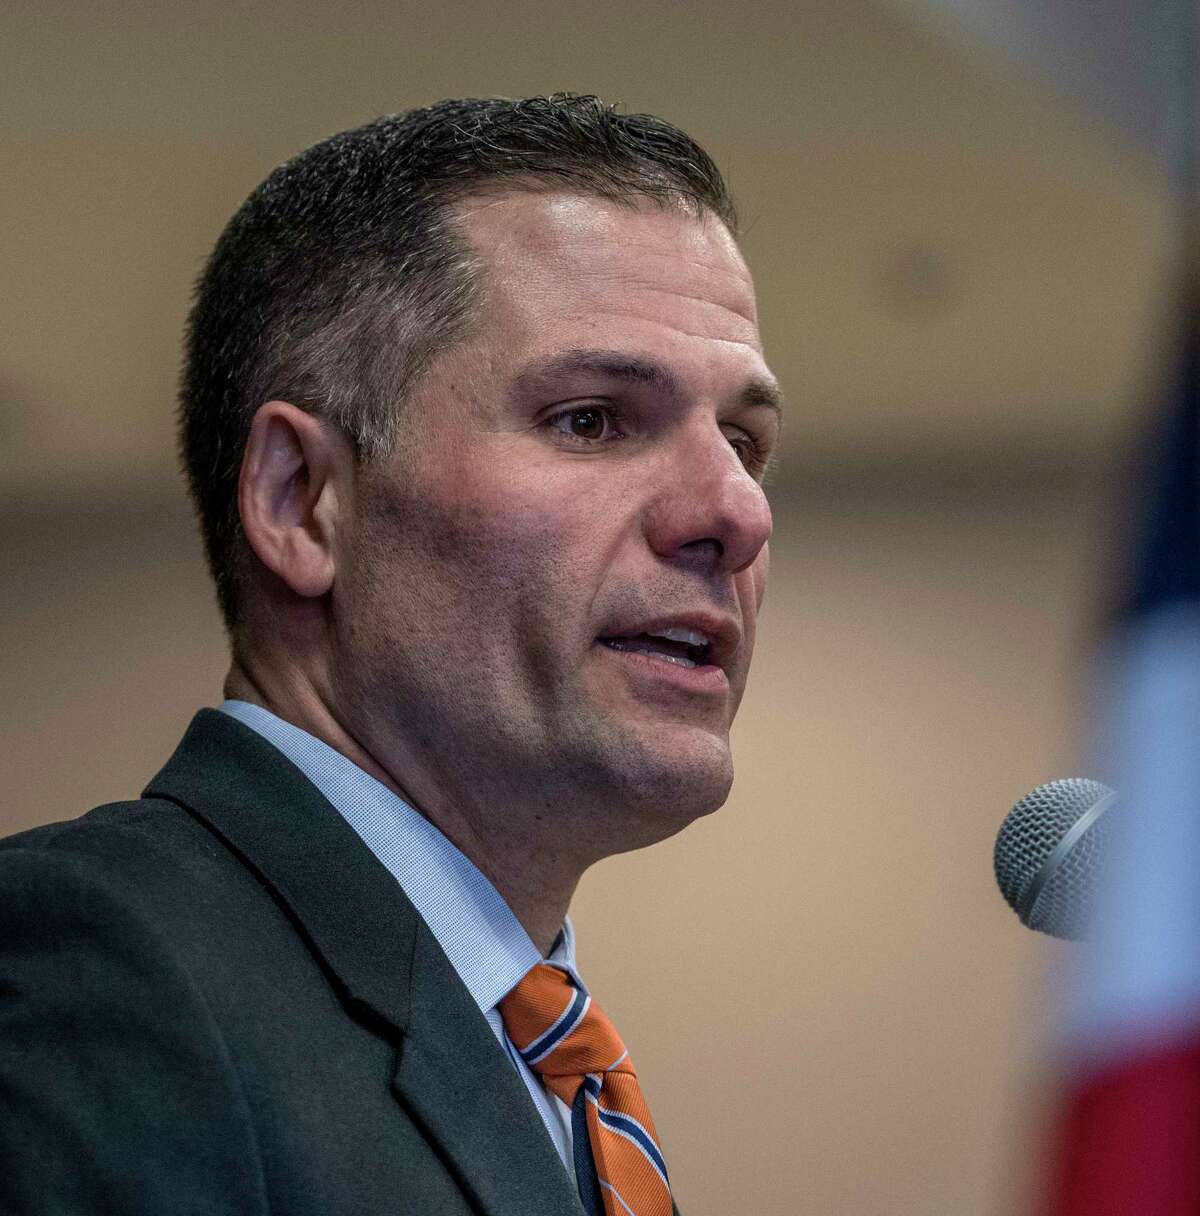 Marc Molinaro announced his intention to run against Andrew Cuomo for the Governor of New York State in a press conference at the Hilton Hotel on Monday, April 2, 2018, in Albany, N.Y. (Skip Dickstein/Times Union)